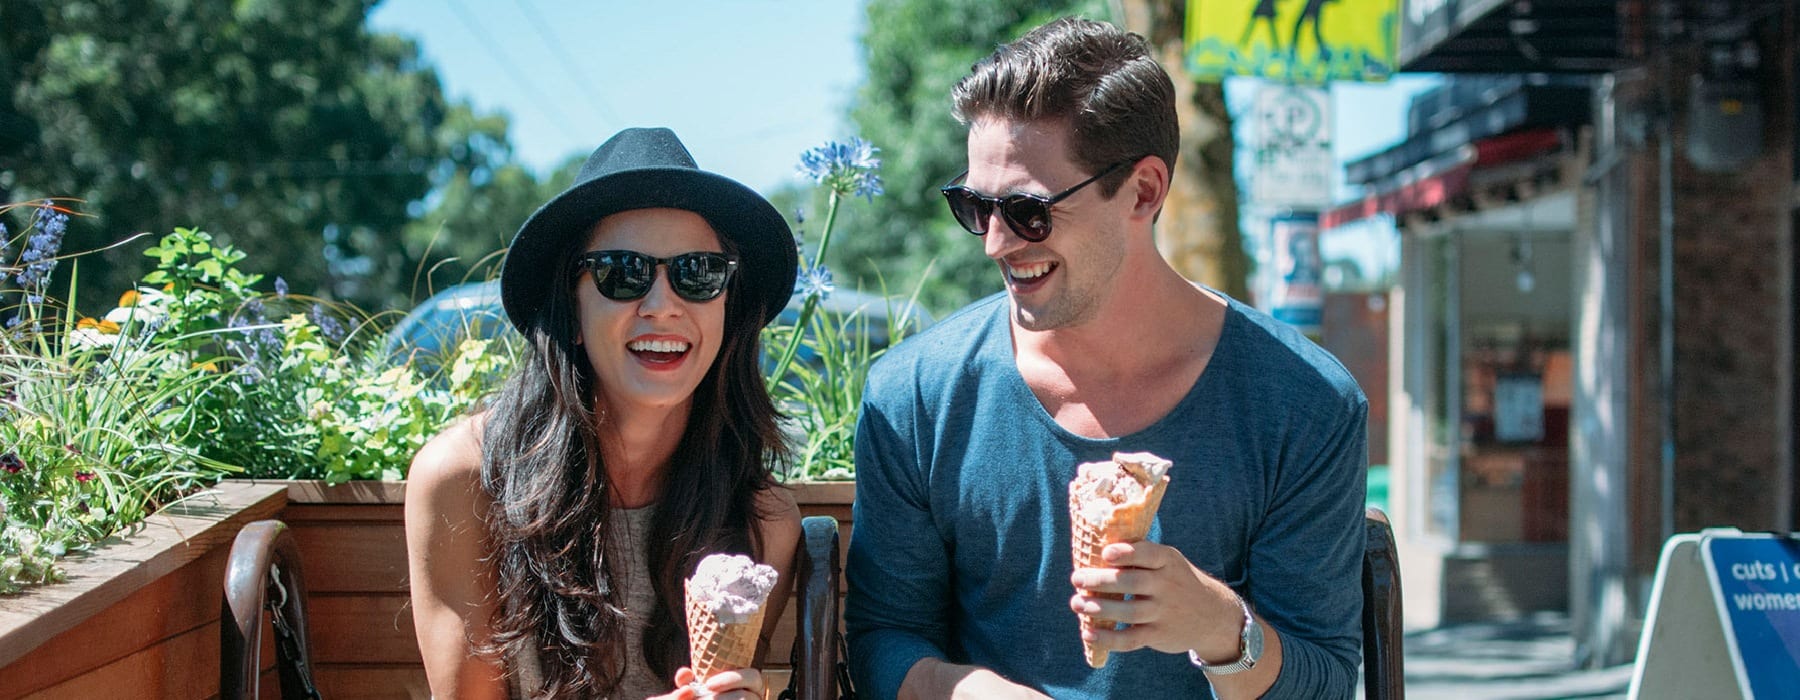 man and woman eating ice cream outside on a sunny day